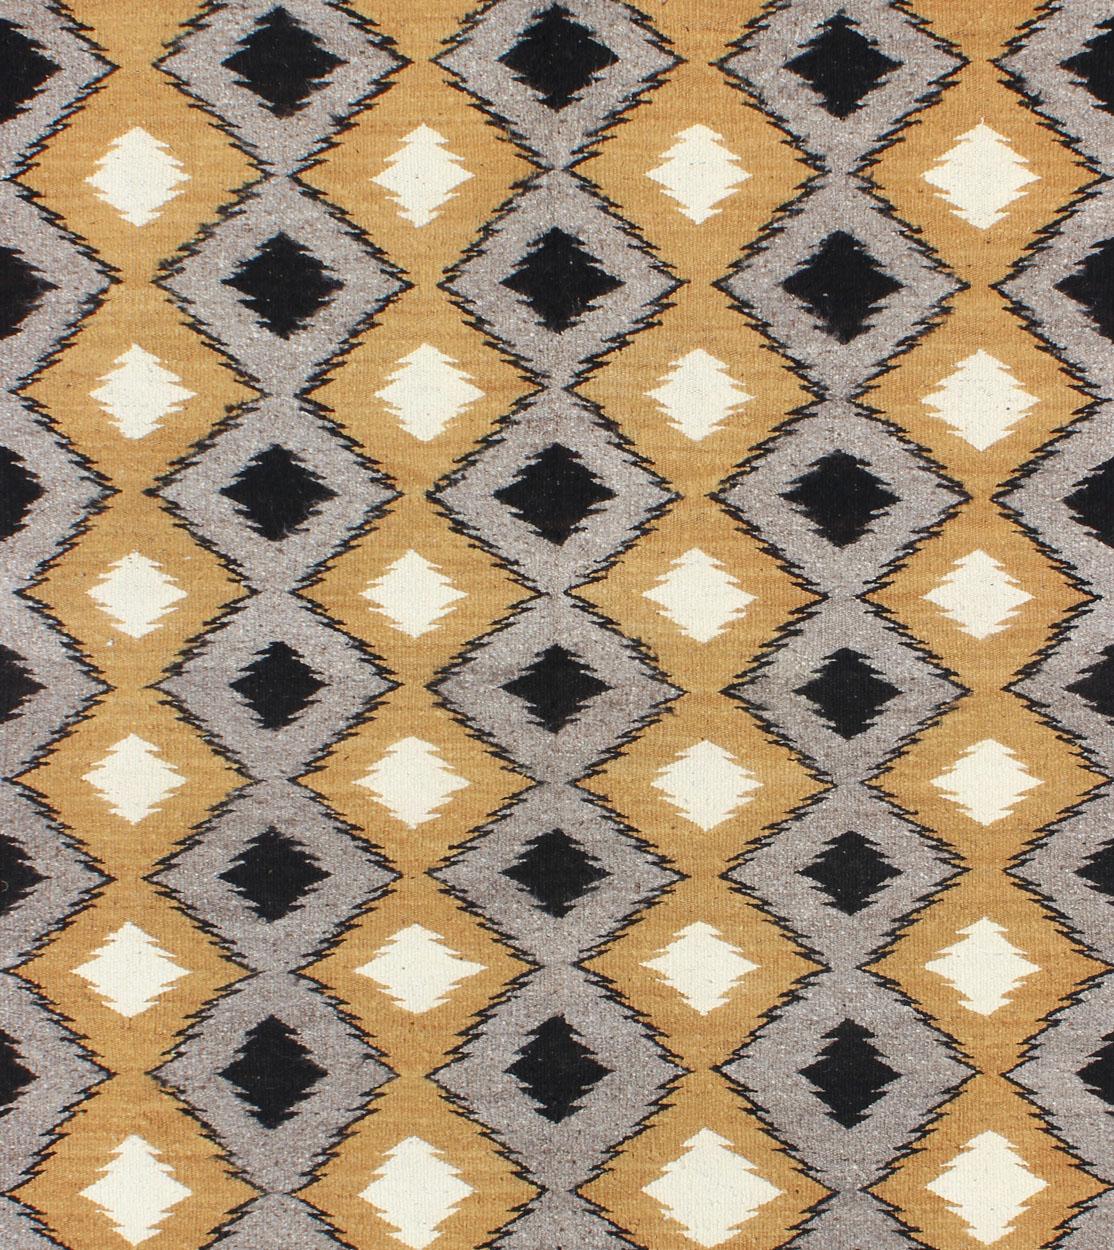 Hand-Woven Allover Tribal Navajo Kilim with Gold, Gray and Black For Sale